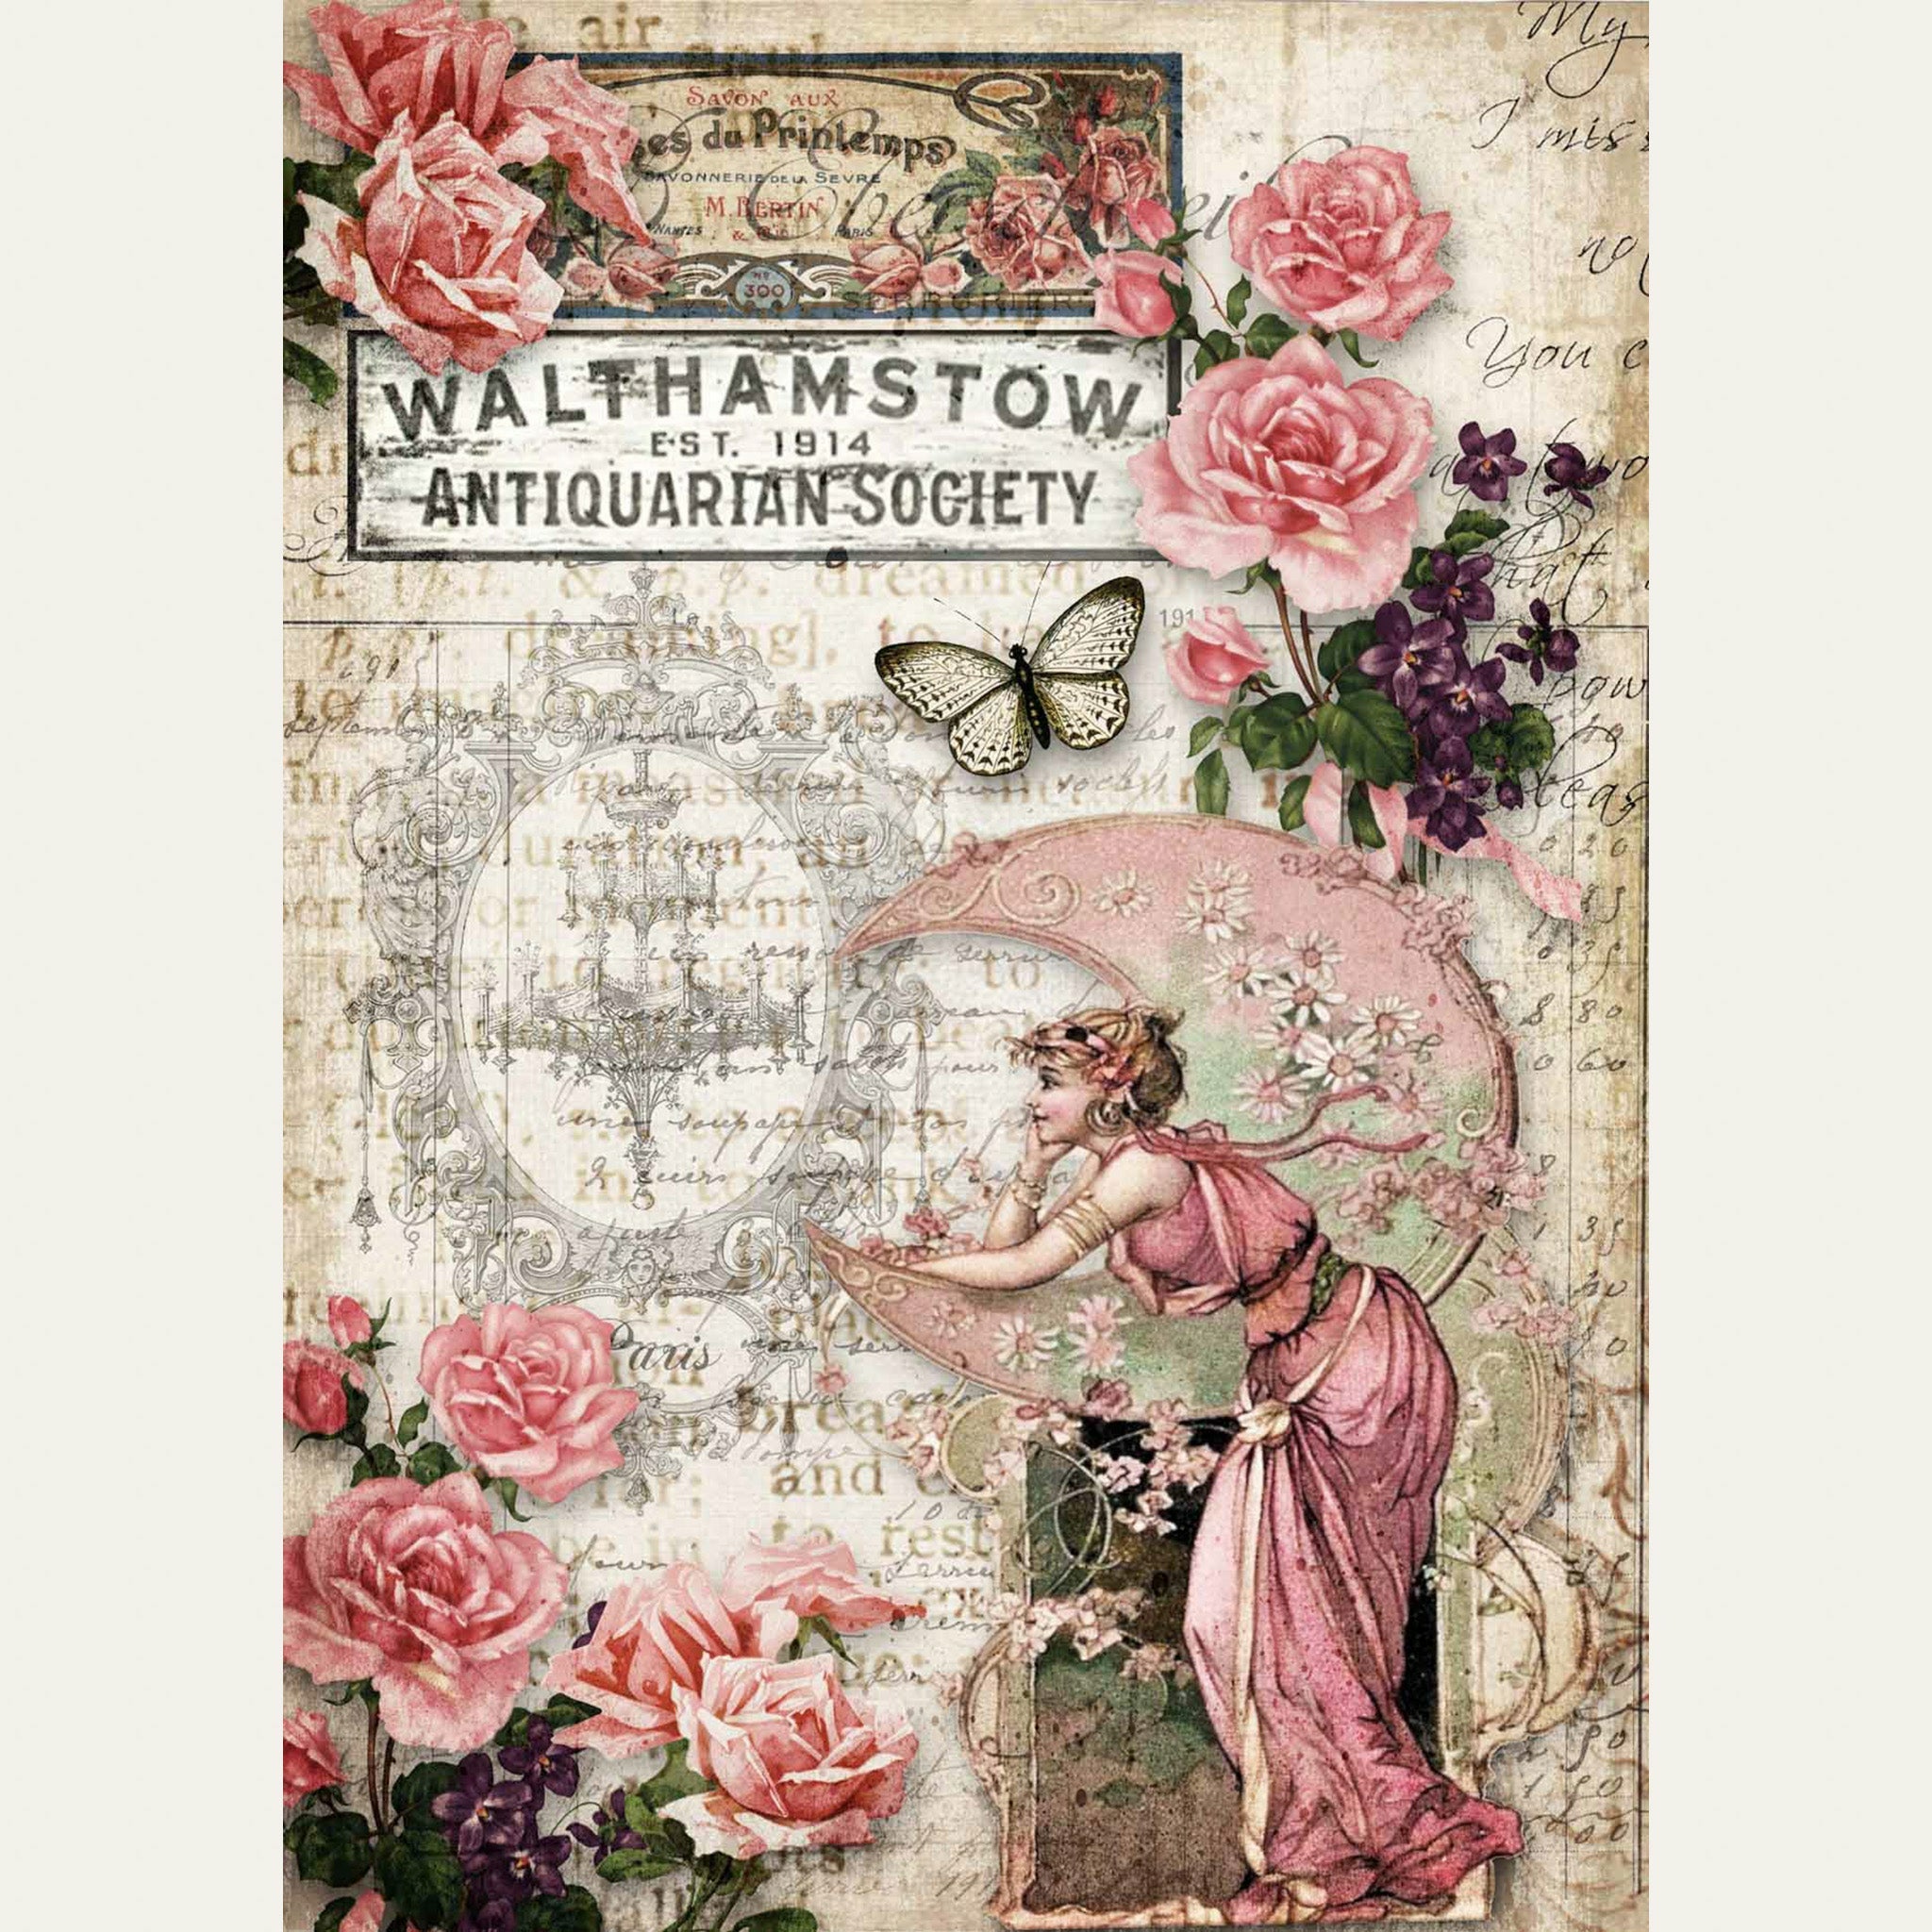 A3 rice paper design that features vintage parchment with writing, large pink roses, a butterfly, vintage signs, and a woman in a pink dress resting on a pale pink crescent moon. White borders on the sides.